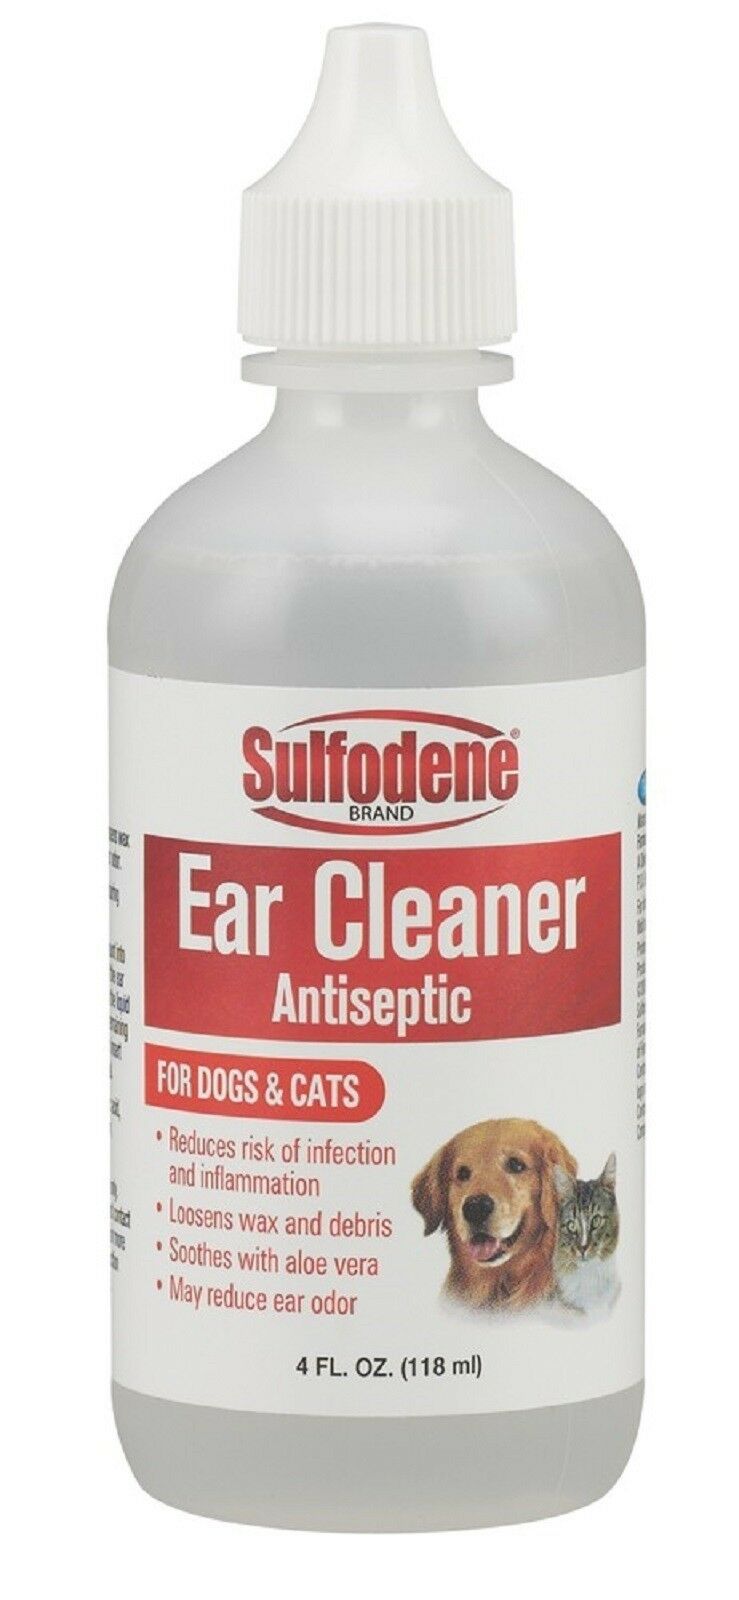 Sulfodene Brand Ear Cleaner For Dogs & Cats, 4 Oz